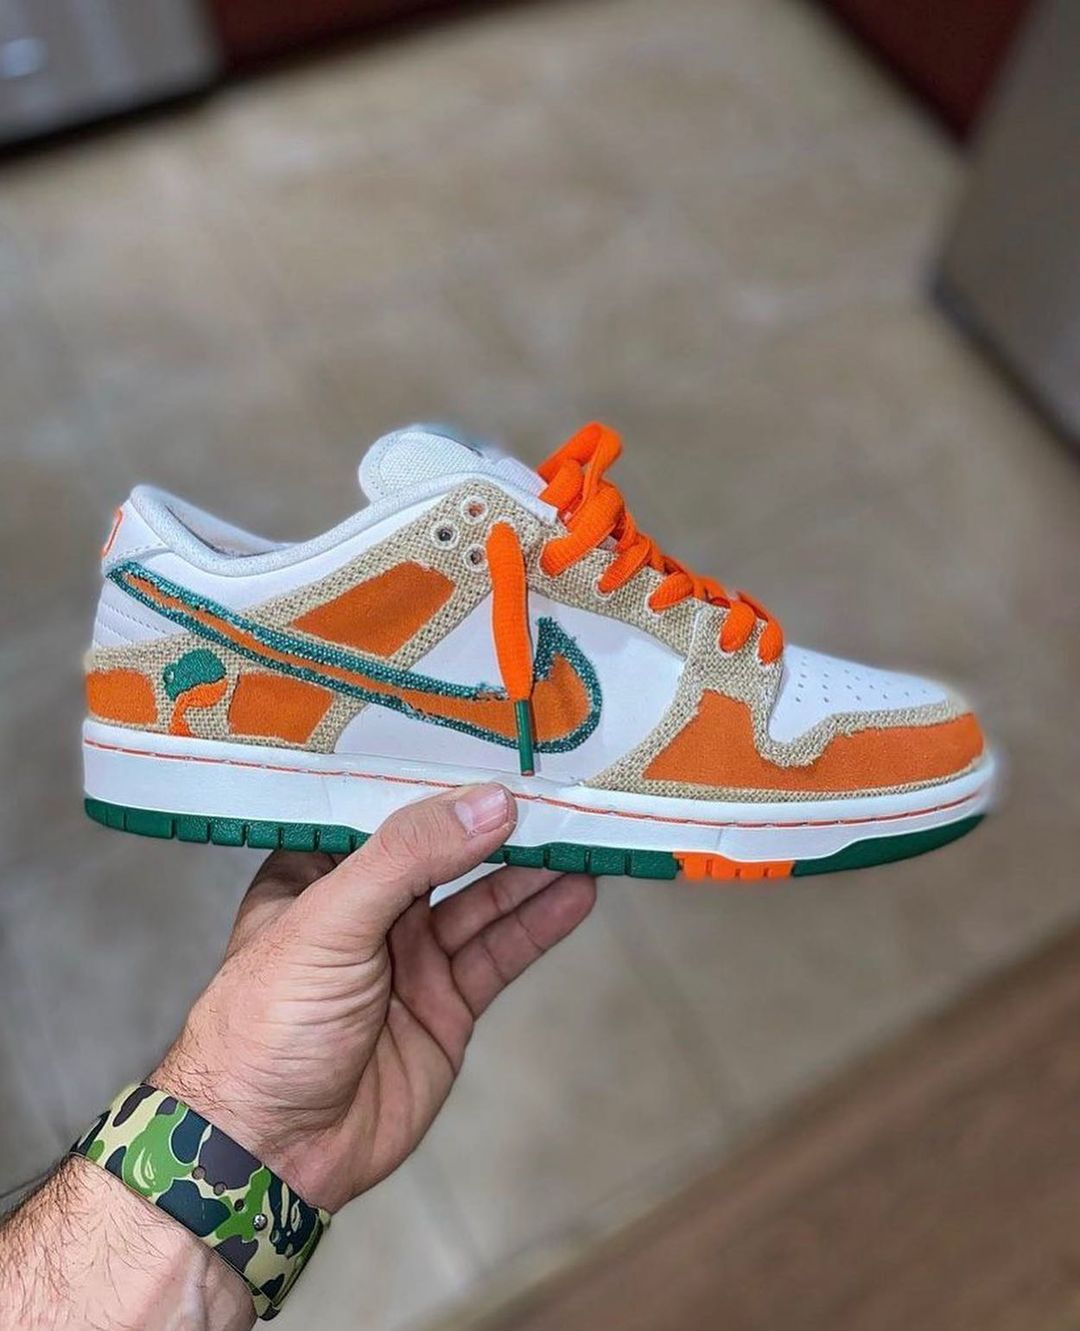 formaat Geaccepteerd herhaling The Sole Supplier on Twitter: "May 2023. Jarritos x Nike SB Dunk Low with  tear away uppers 🥤 https://t.co/j2ItZOrUAg" / Twitter